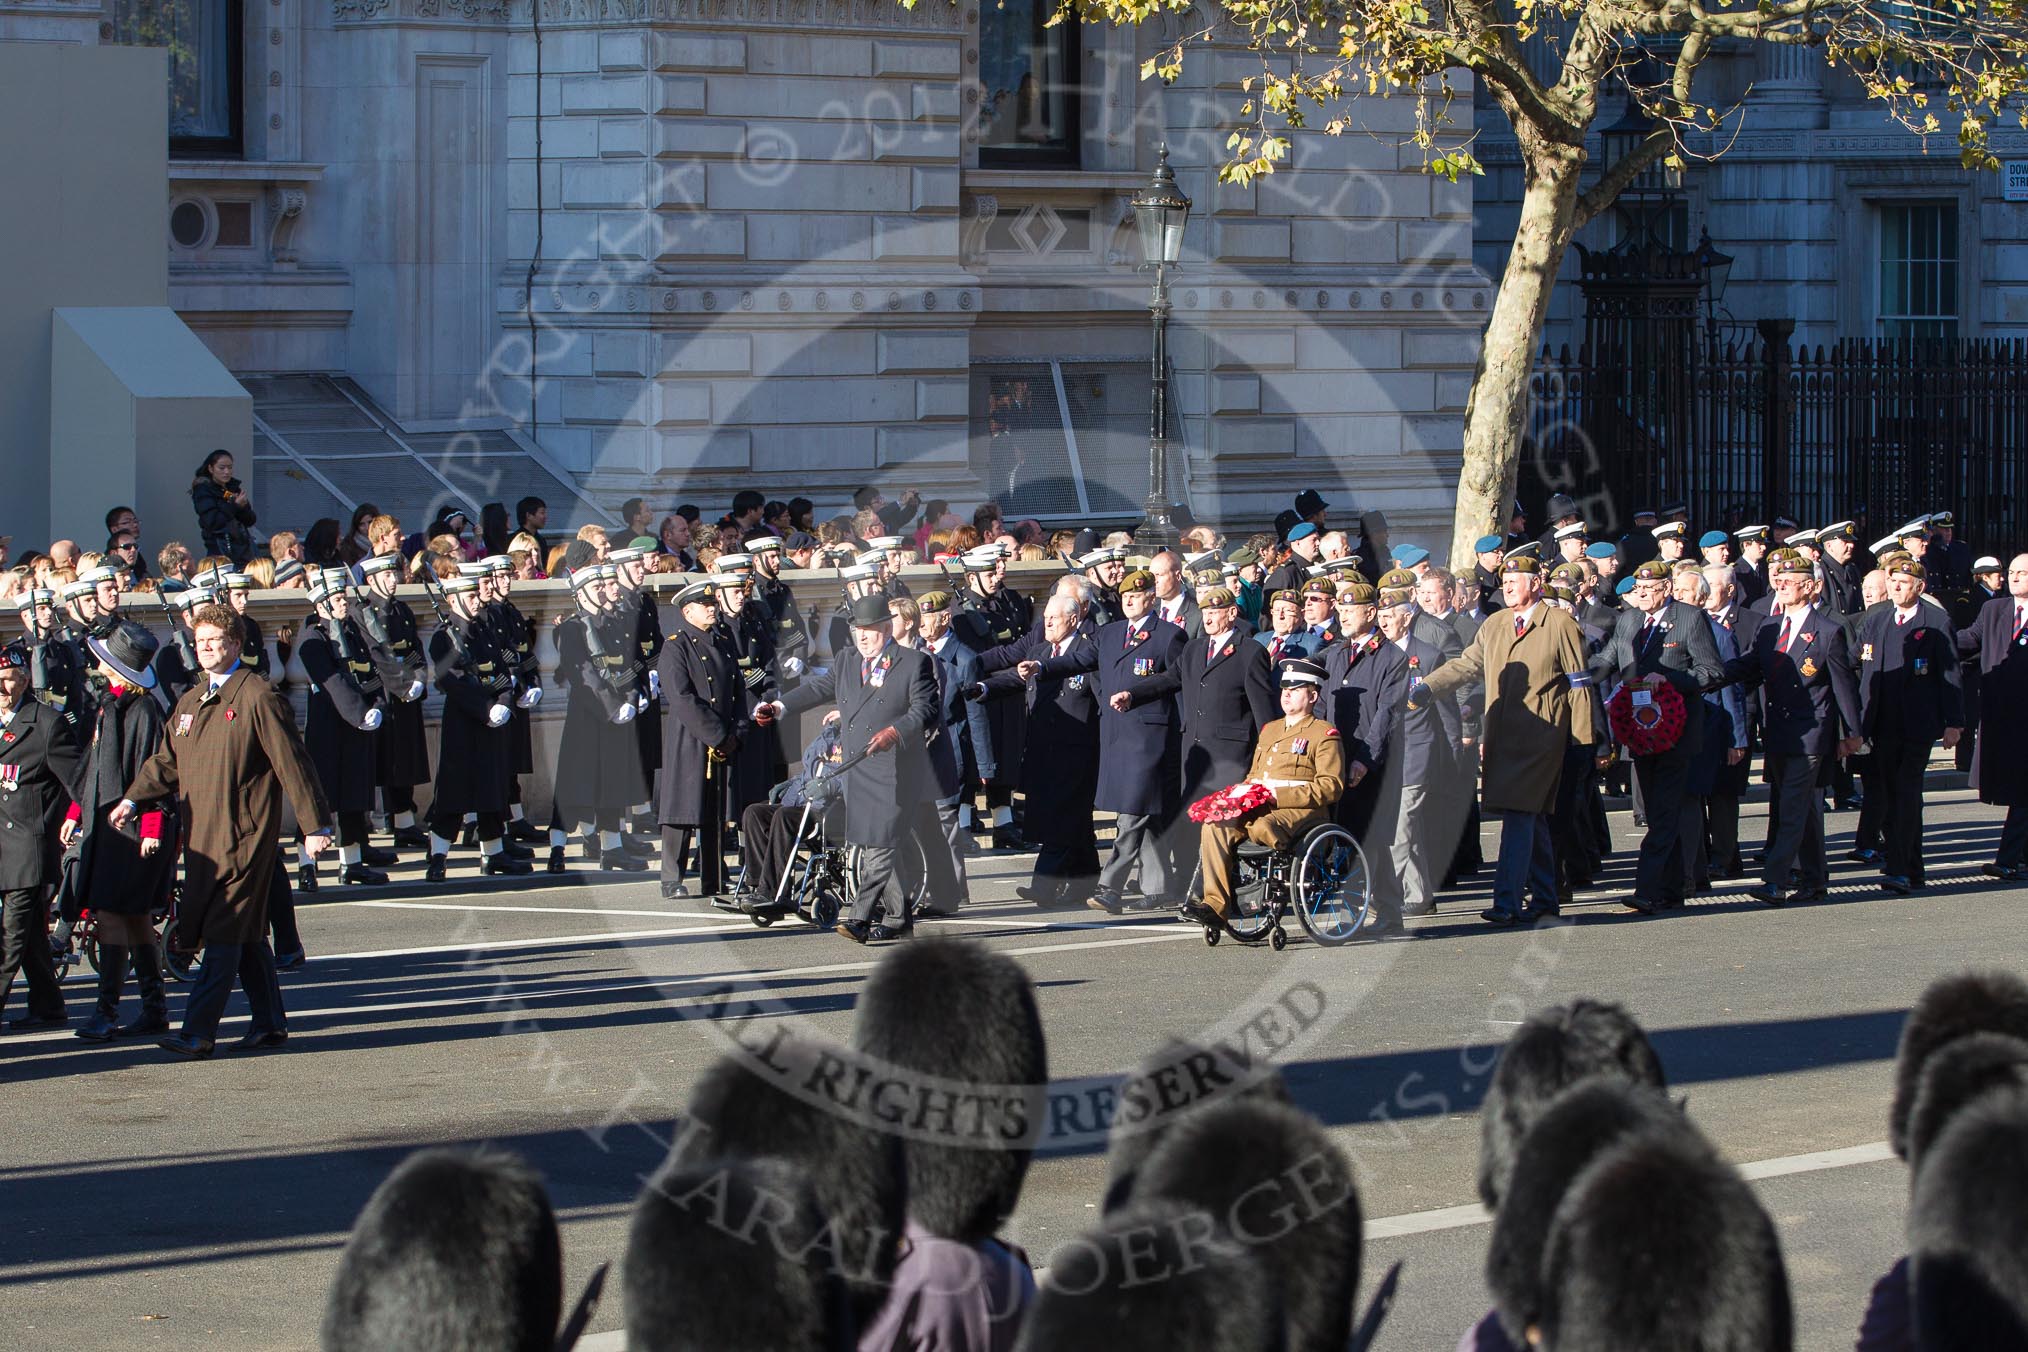 Remembrance Sunday 2012 Cenotaph March Past: Group A24 - Gordon Highlanders Association and A25 - Argyll & Sutherland Highlanders Regimental Association..
Whitehall, Cenotaph,
London SW1,

United Kingdom,
on 11 November 2012 at 11:52, image #738